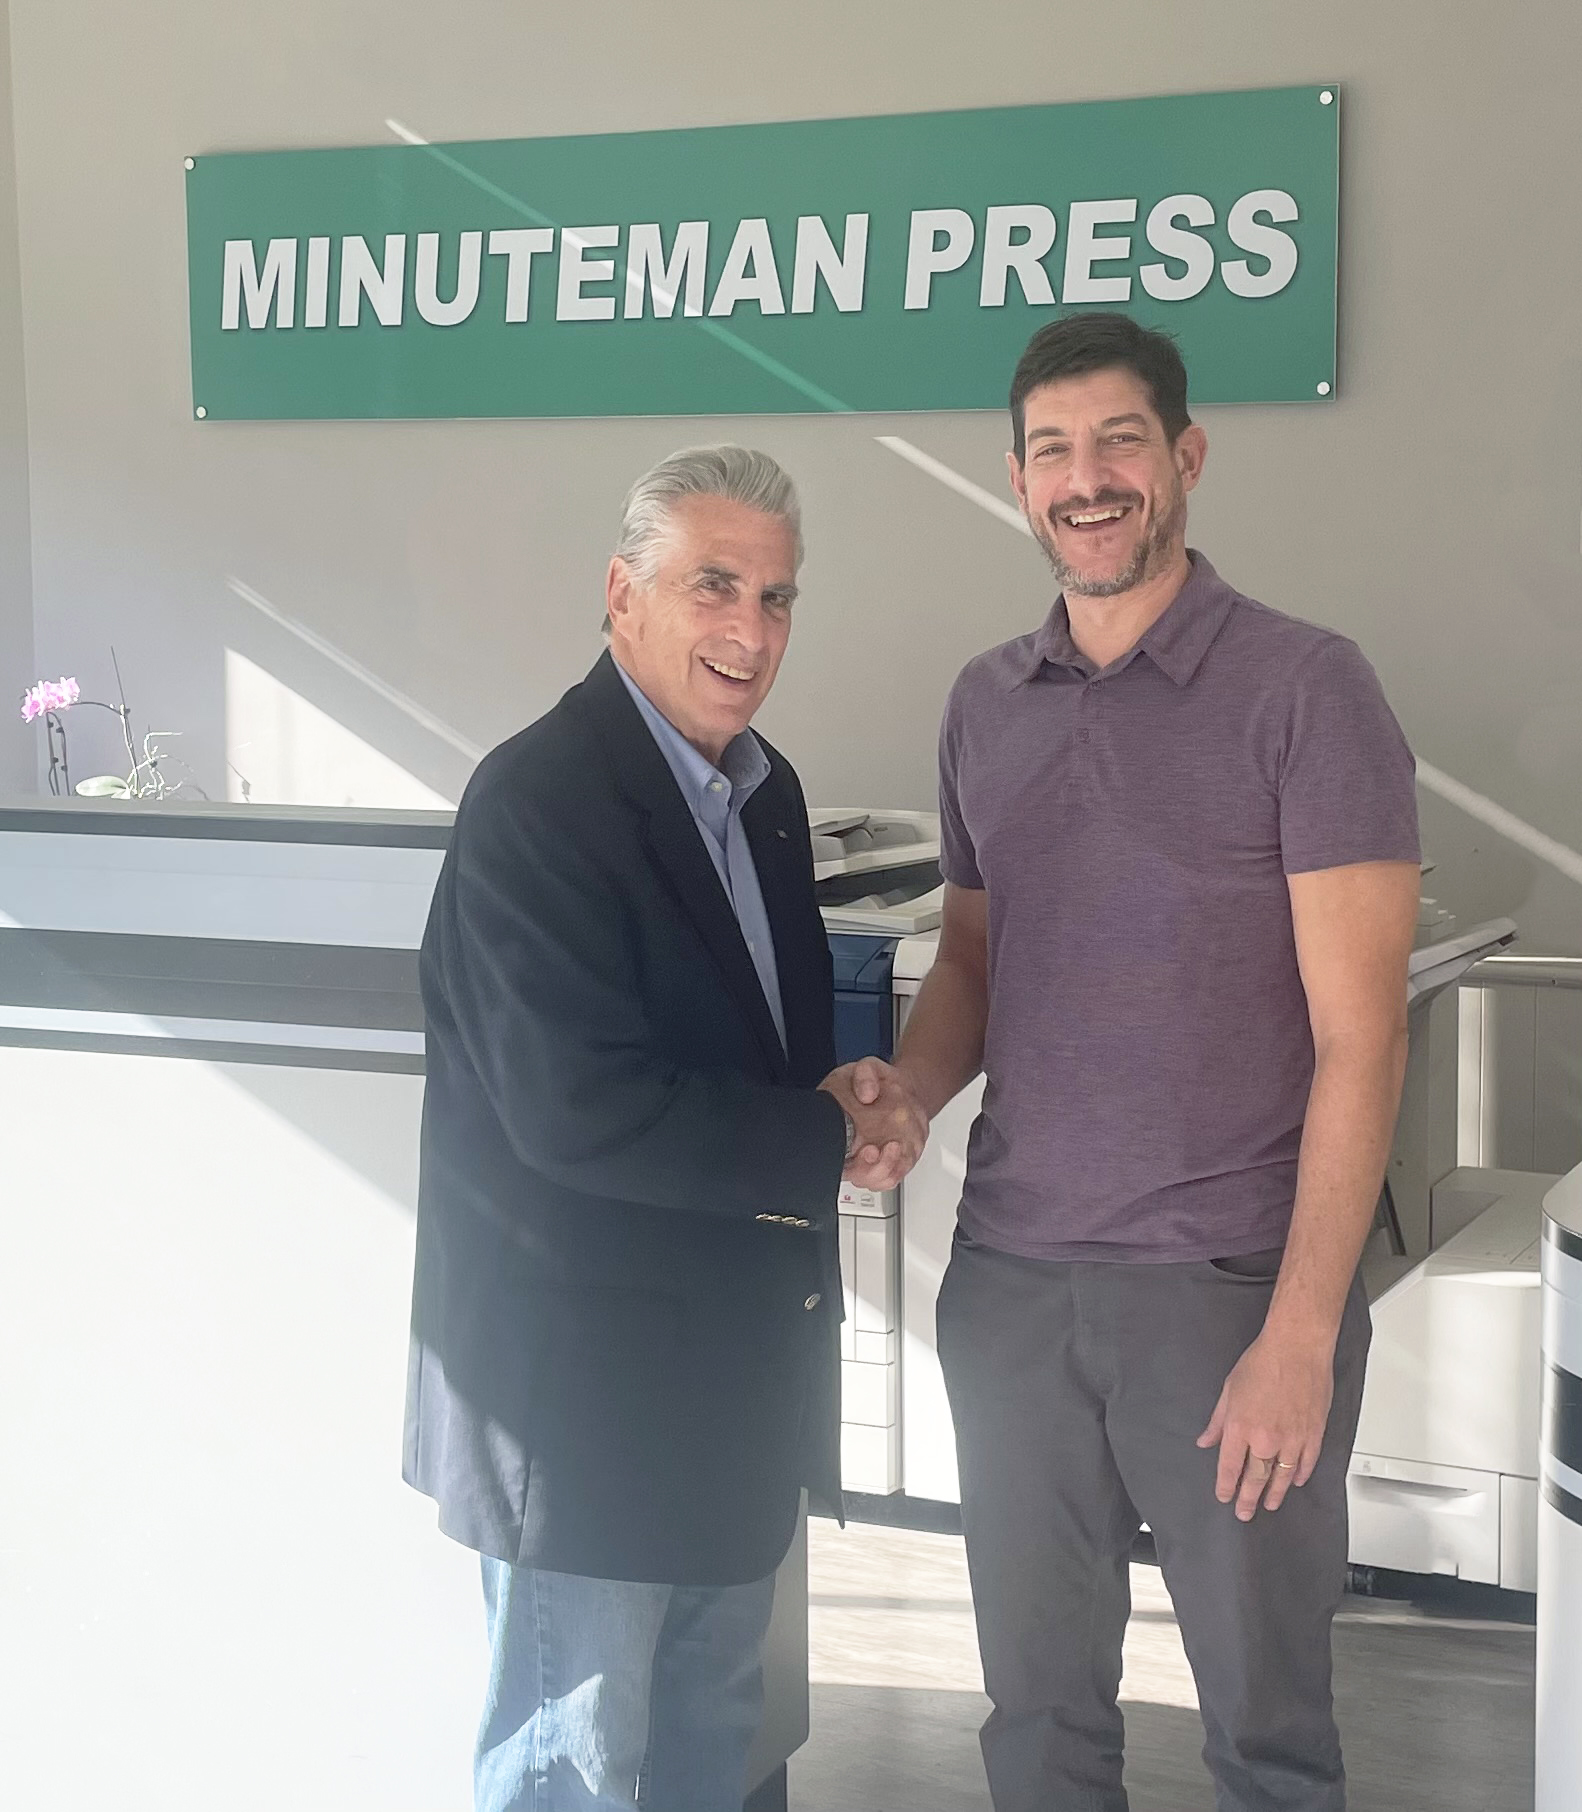 Alloy Printing owner Alan Goldman (now retired) with new Minuteman Press franchise owner Chris Greene. Alloy Printing is now Minuteman Press, White Plains, NY.